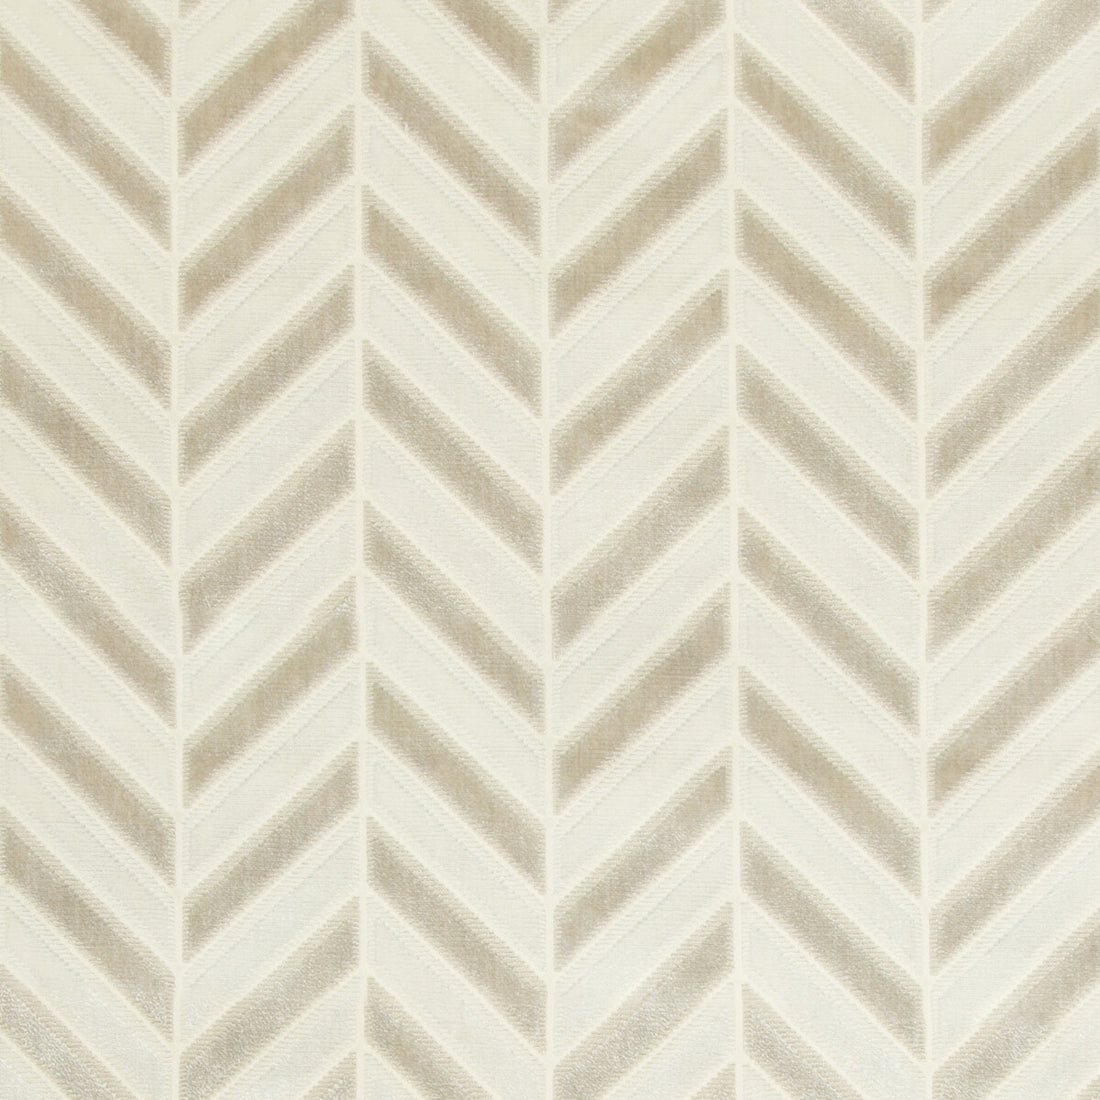 Pinnacle Velvet fabric in stone color - pattern 34779.411.0 - by Kravet Couture in the Artisan Velvets collection